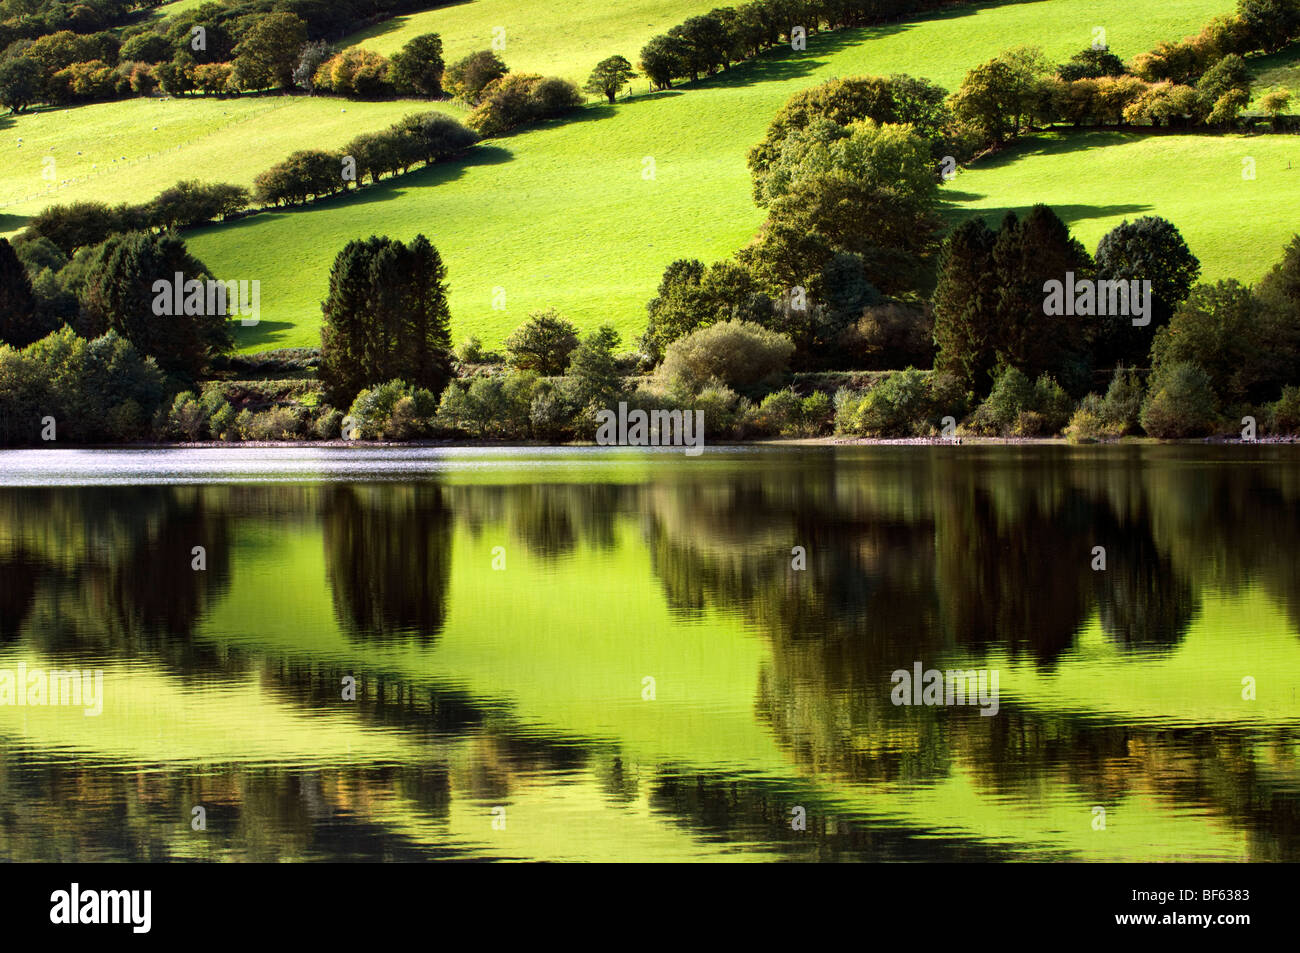 Perfect reflection of green fields at Talybont reservoir, Brecon Beacons in Wales taken on beautiful bright sunny day Stock Photo